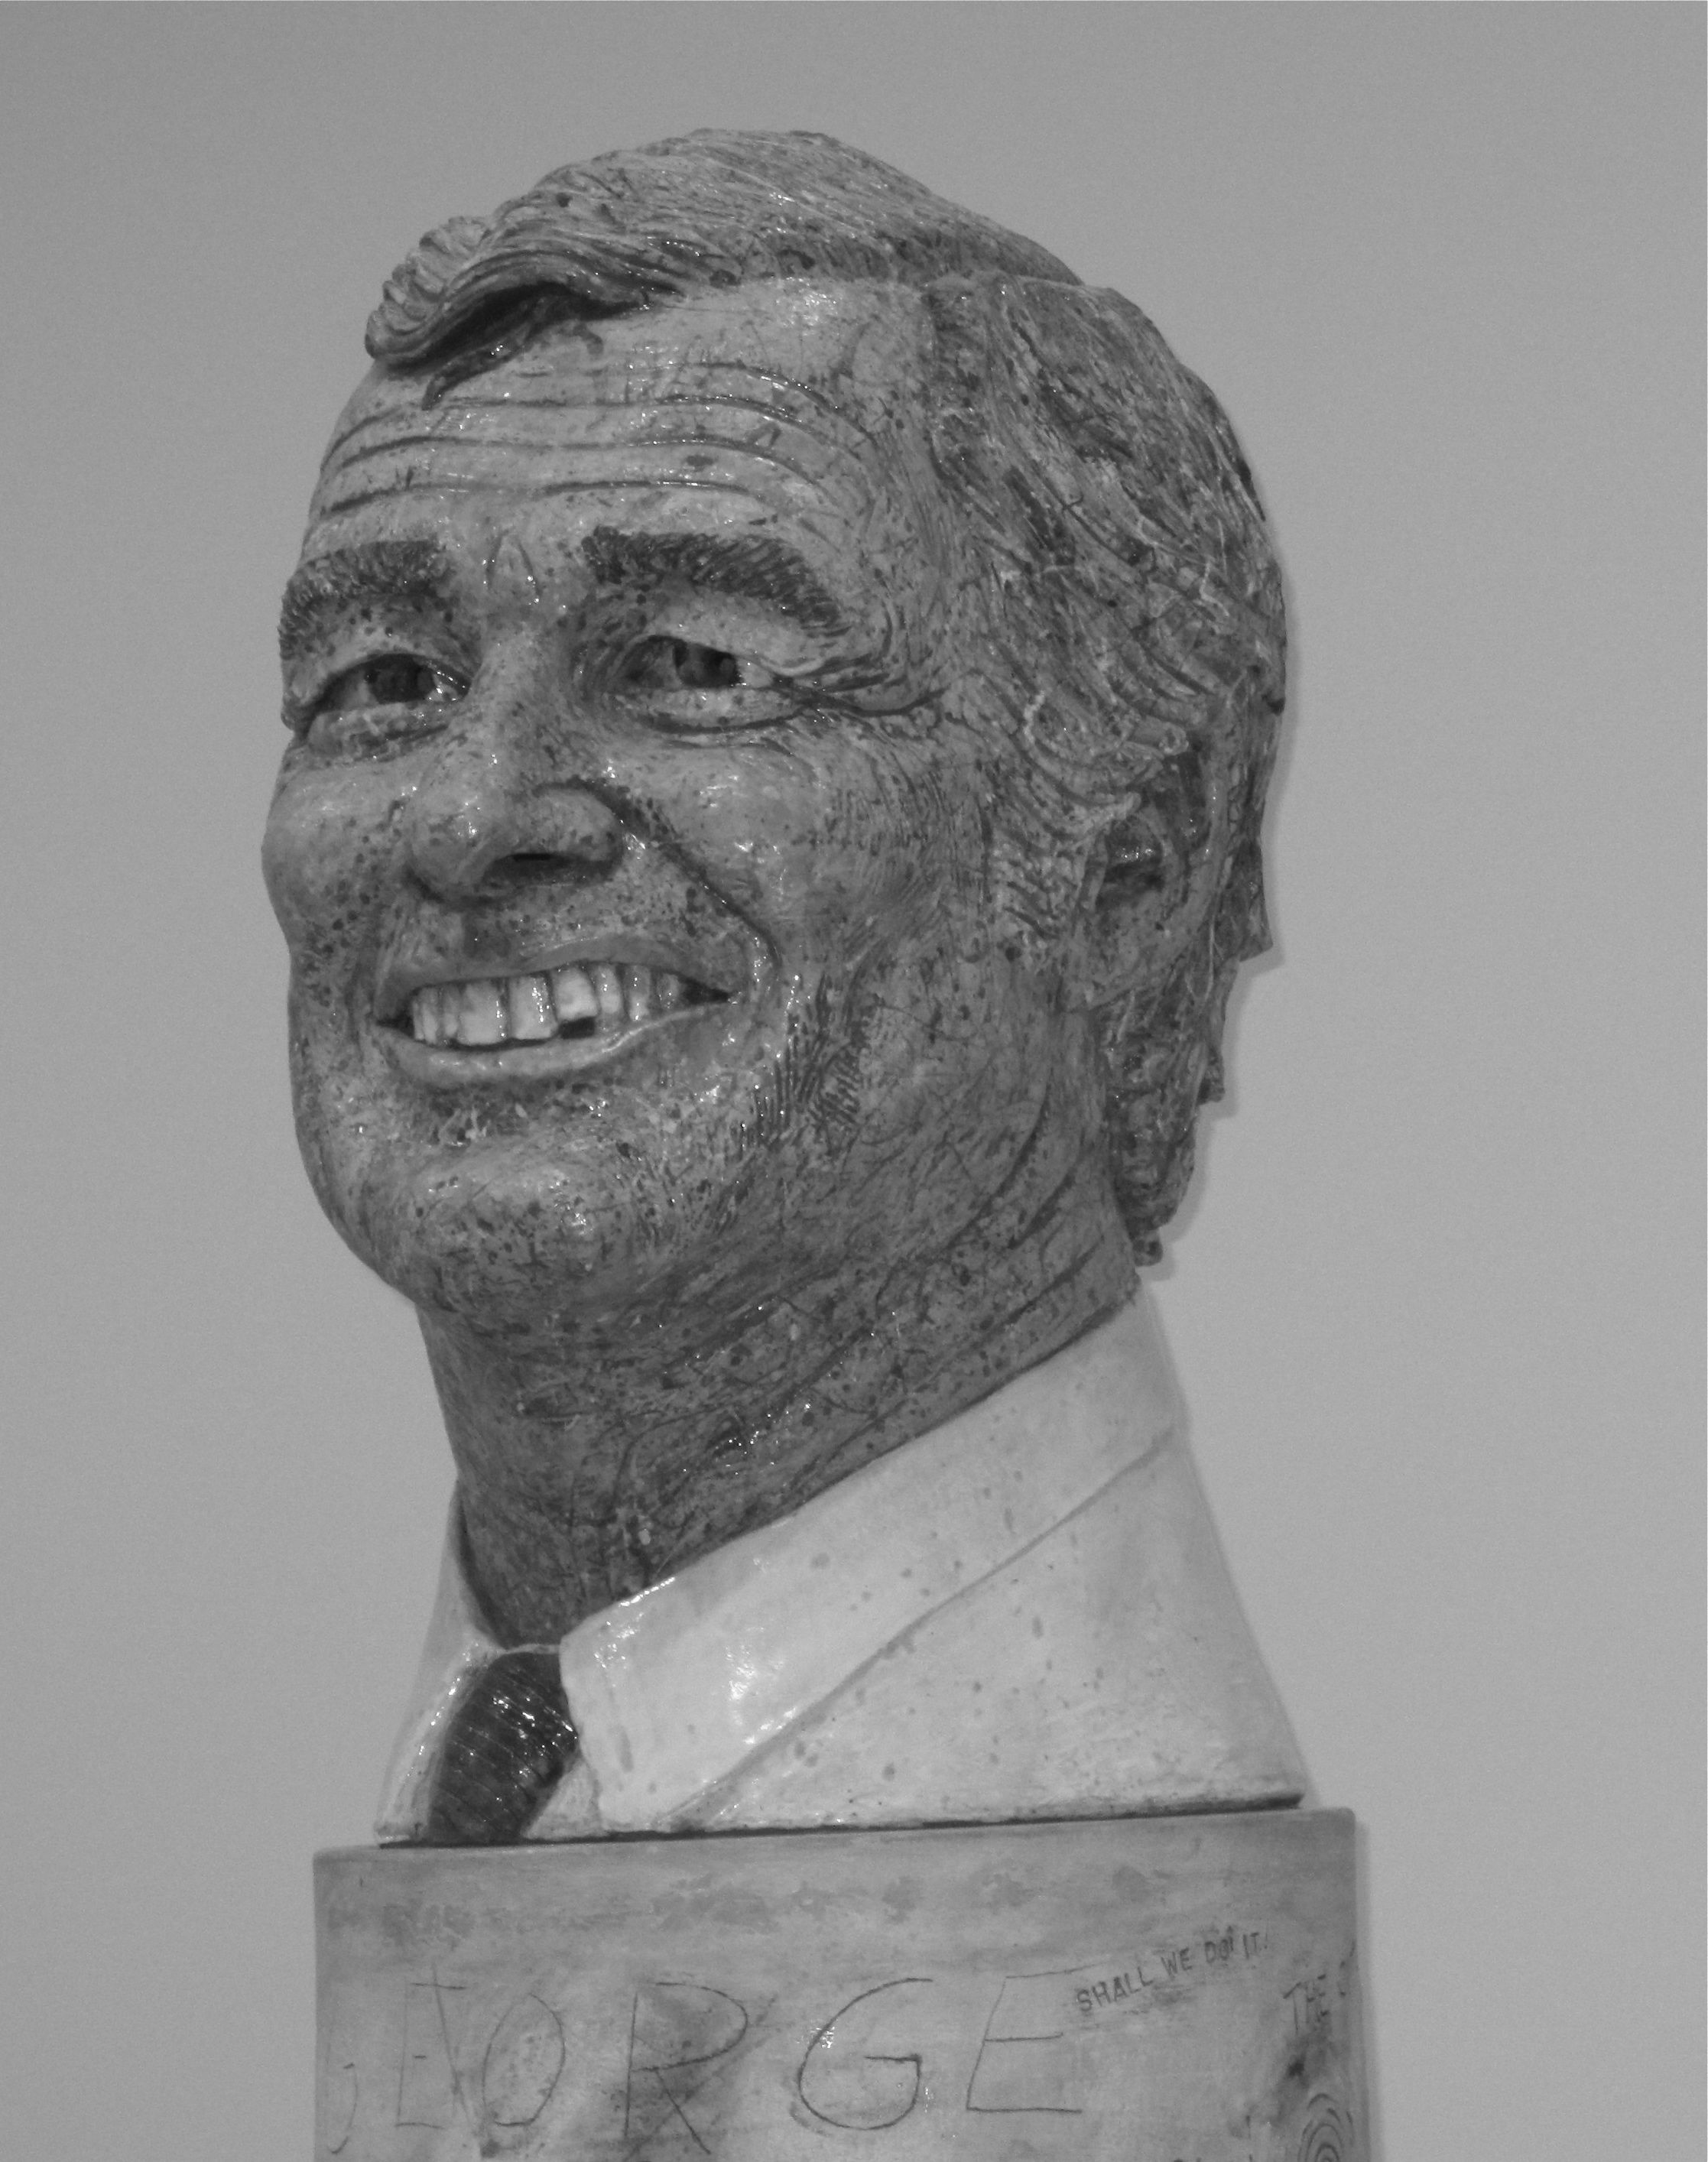 Figure 4 This photo is a close-up image of the head of the George Moscone bust. It is extremely photo-realistic, portraying wrinkles, glossy hair, and an unflattering smile. The word “George” is roughly carved under the bust.